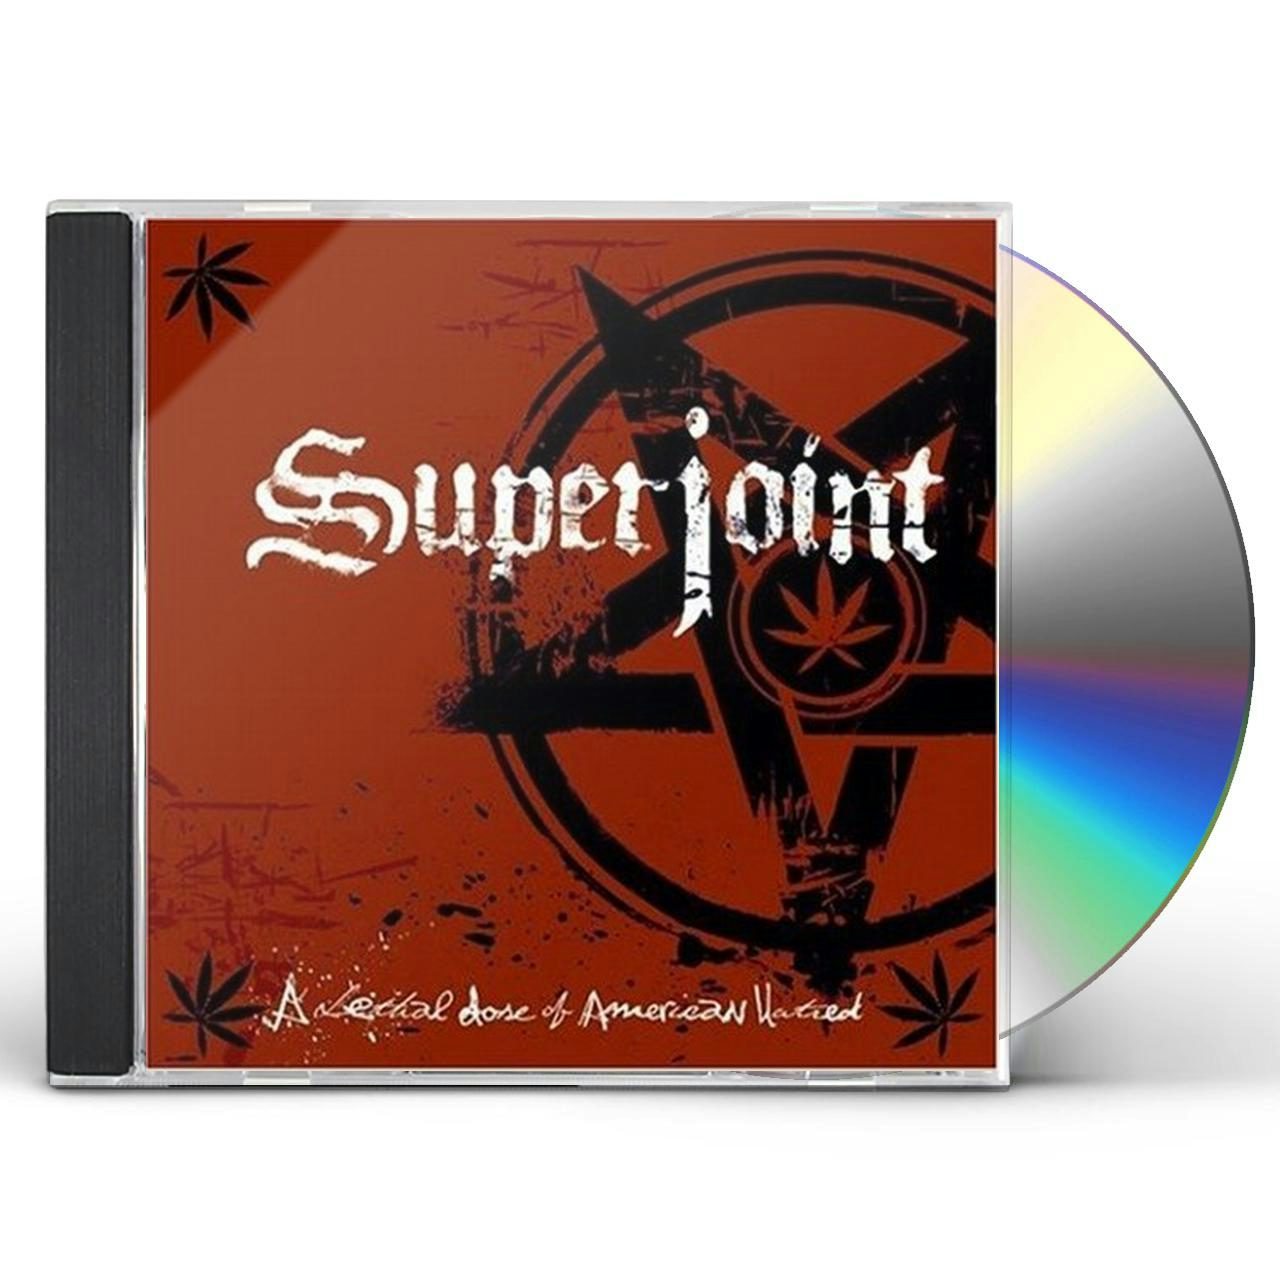 lethal dose of american hatred cd - Superjoint Ritual